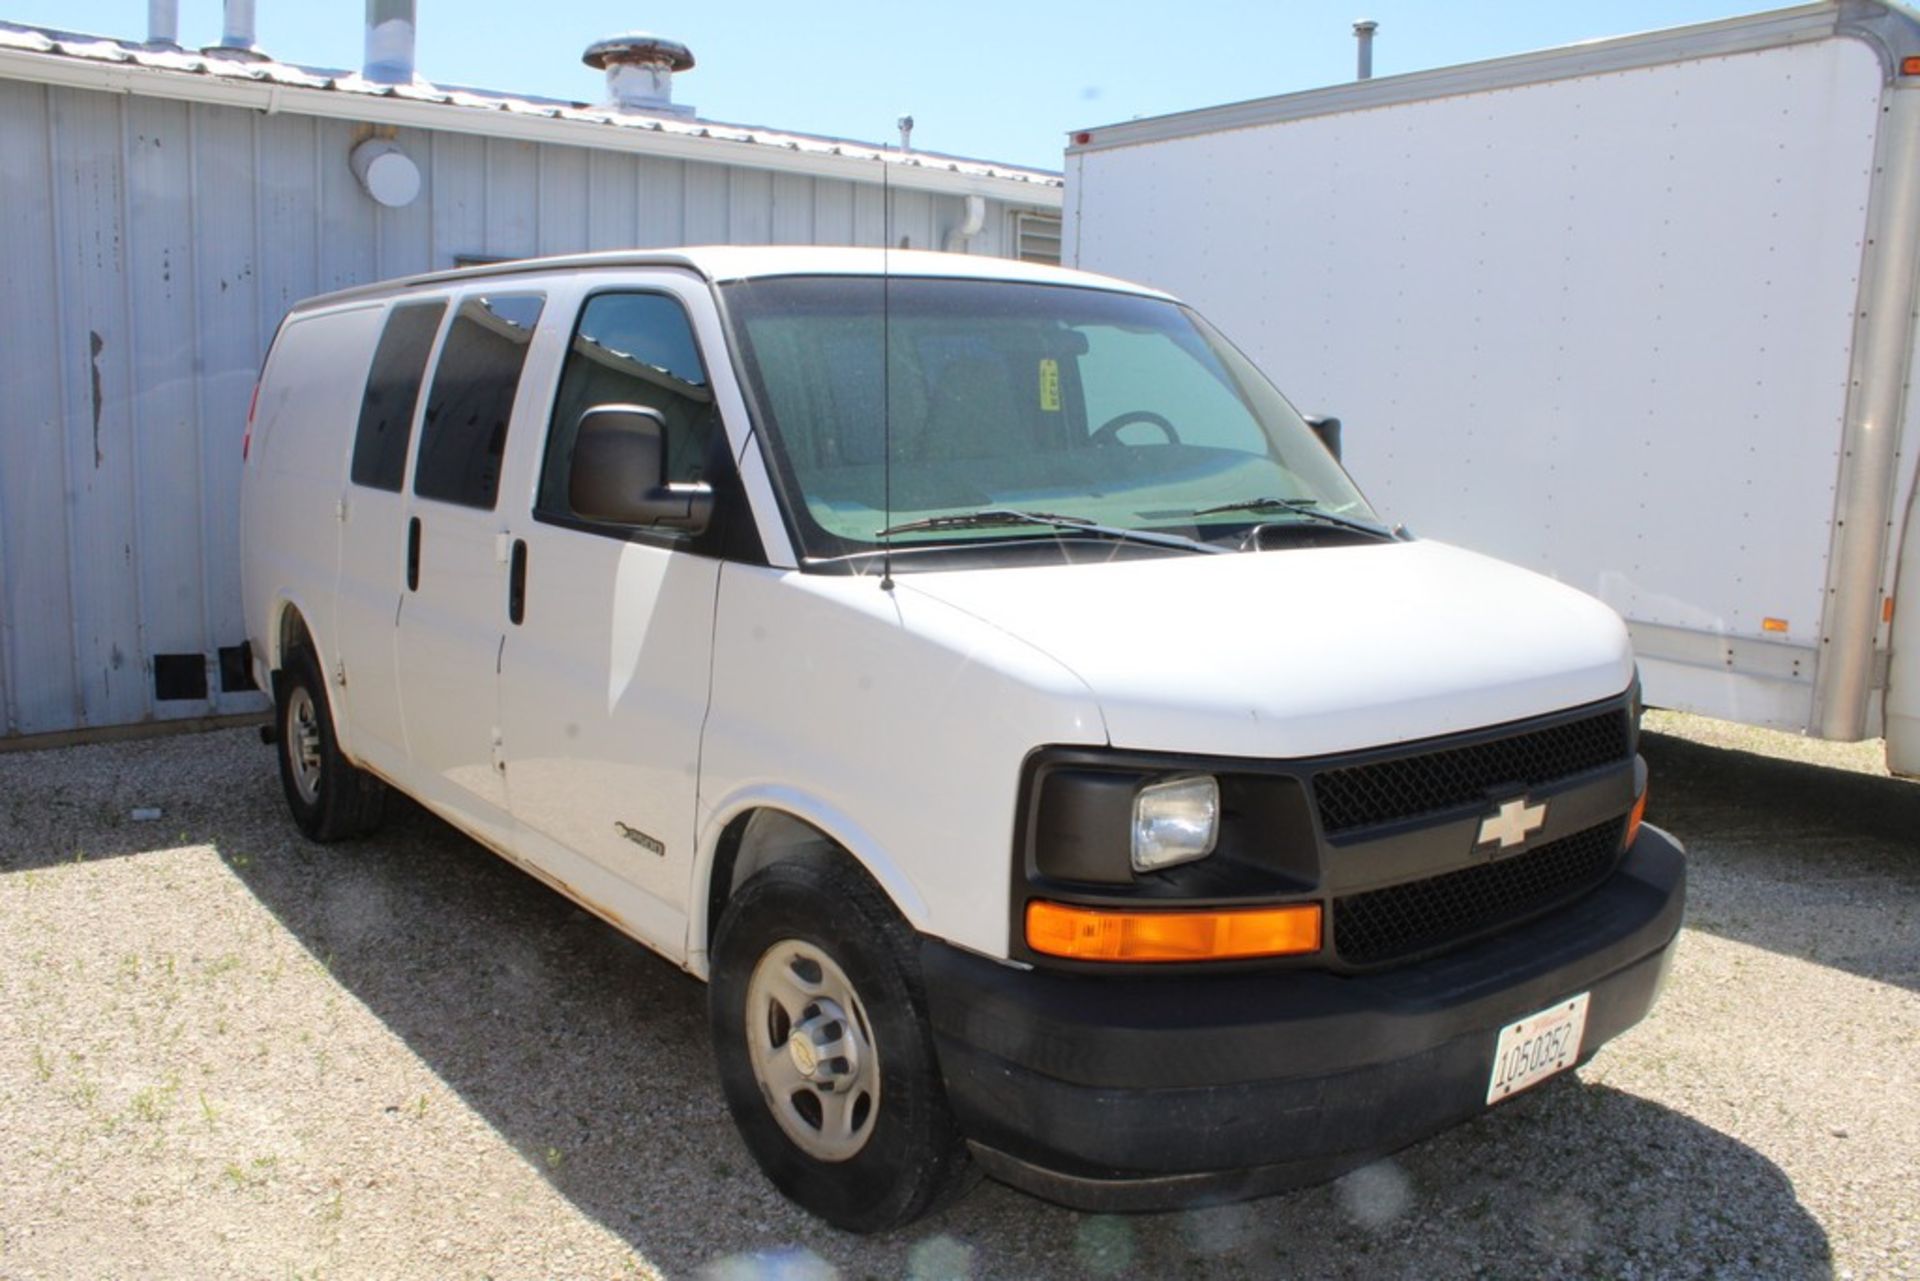 2003 CHEVROLET MODEL 2500 CARGO VAN, VIN: 1GCFG25T131159094, AUTOMATIC TRANSMISSION, APPROX. 167,000 - Image 2 of 10